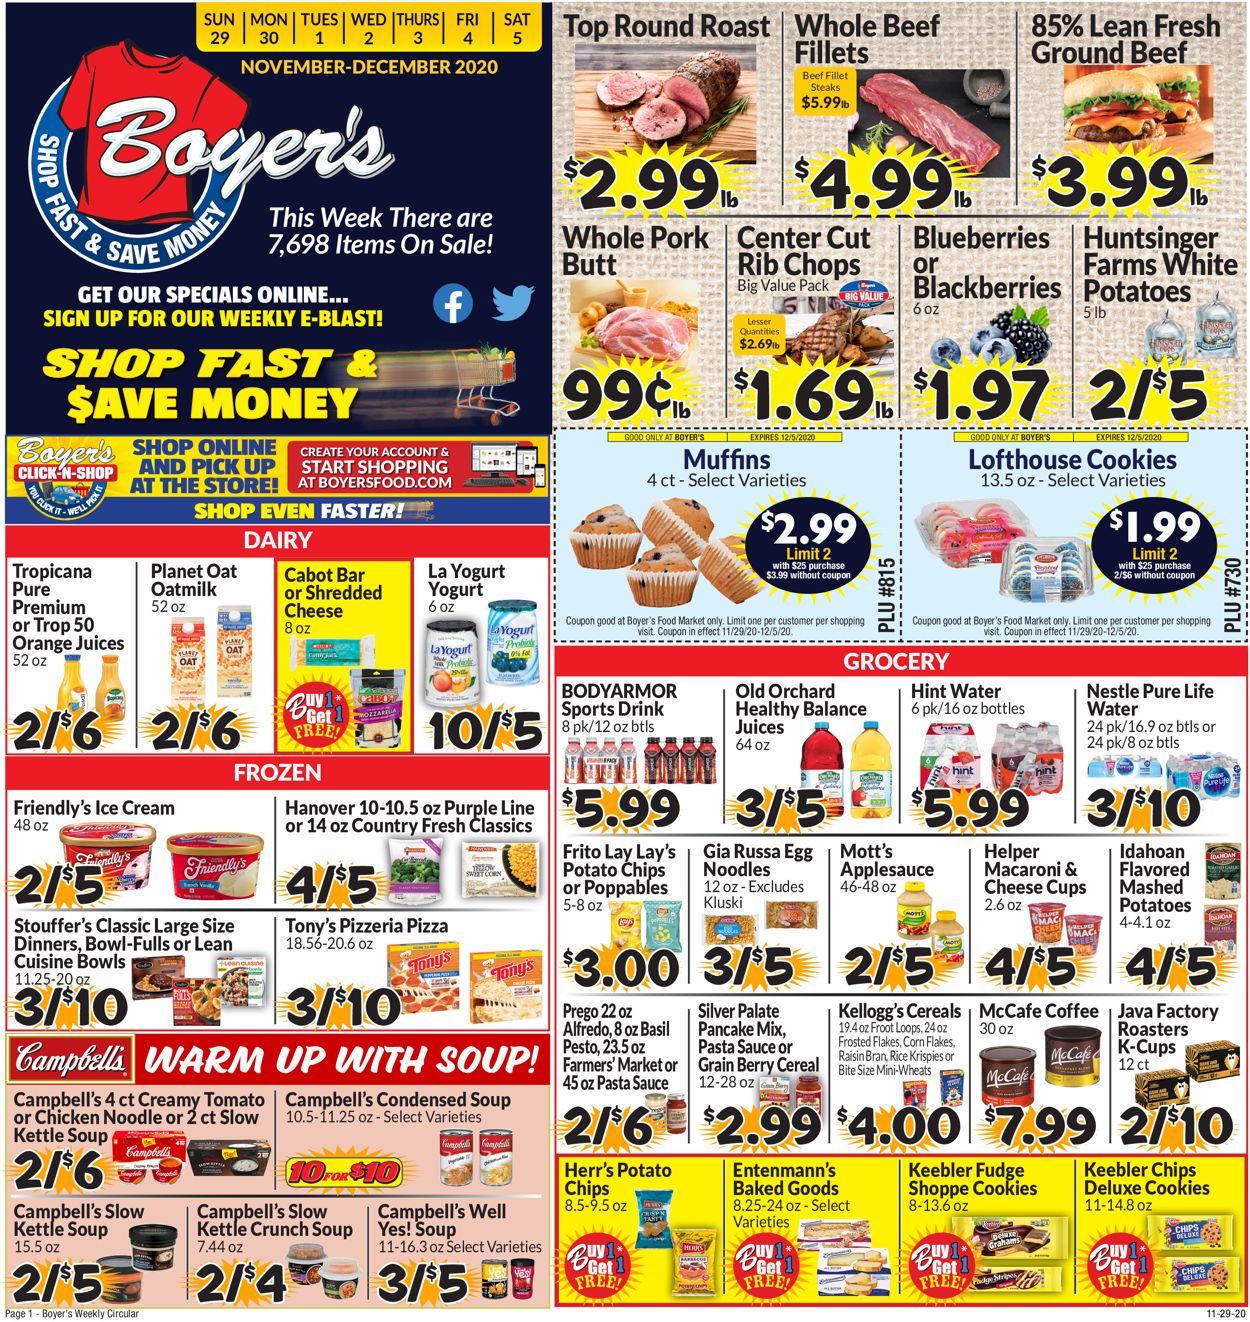 Boyer's Food Markets - Cyber Monday 2020 Weekly Ad Circular - valid 11/29-12/05/2020 (Page 3)